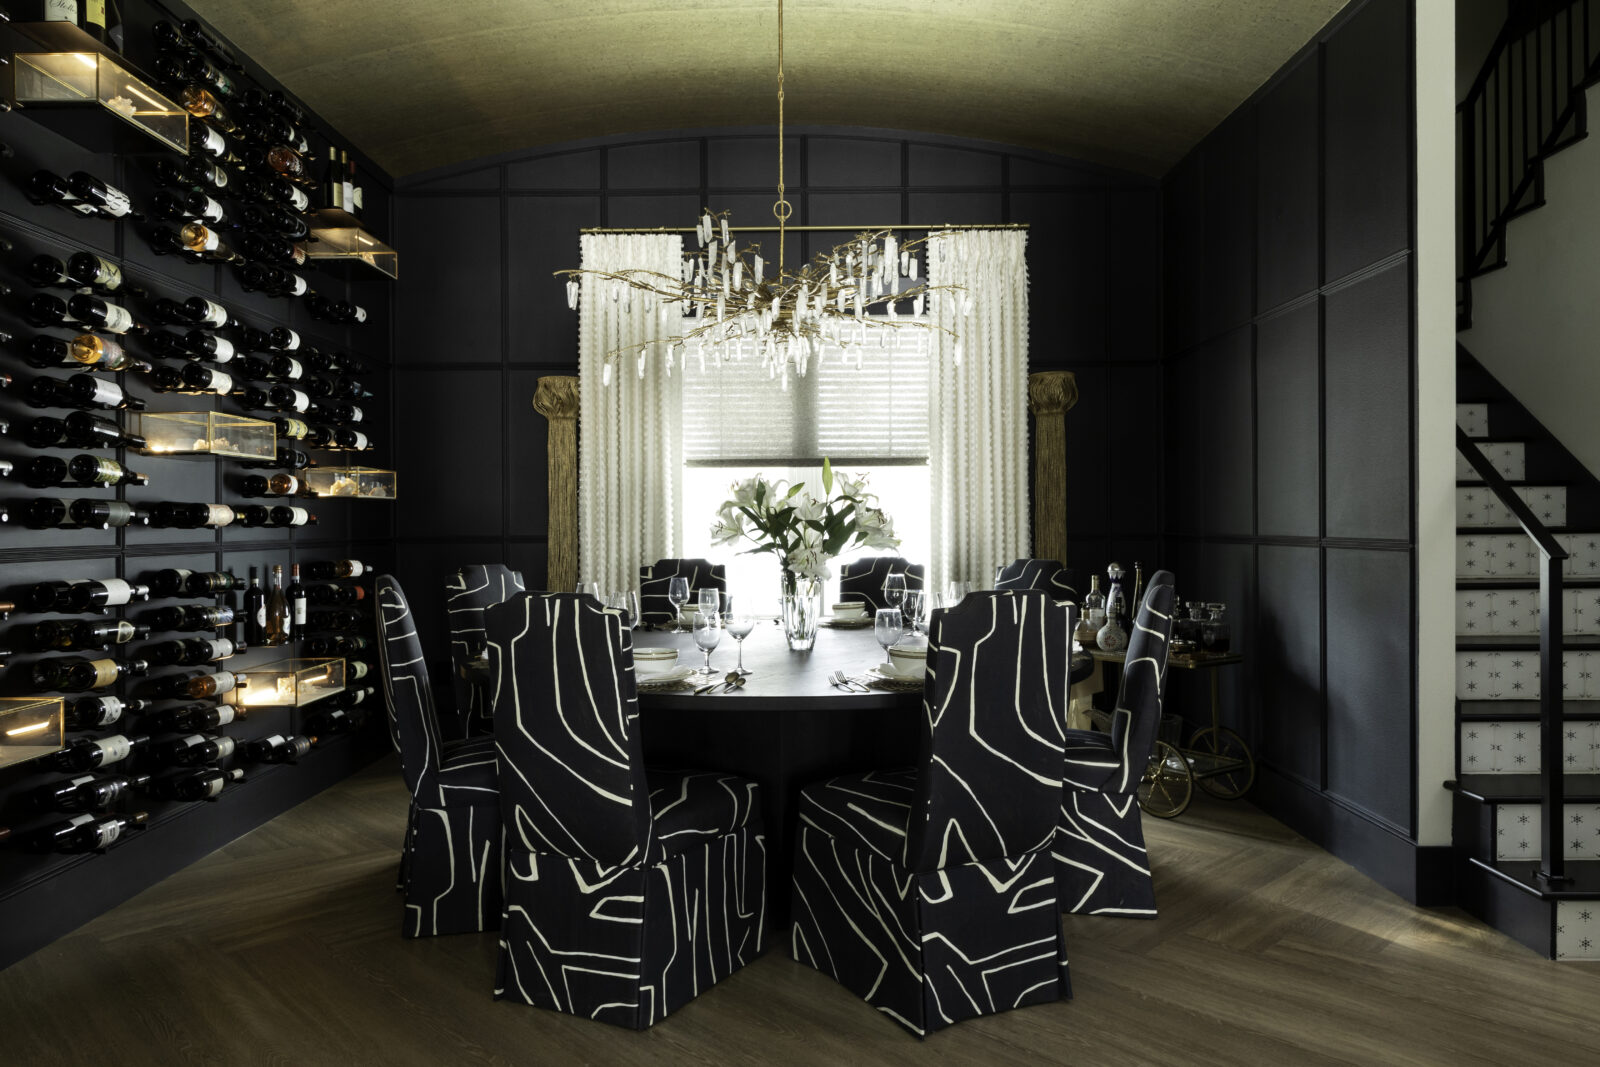 Lisa Gilmore Dining Room Black Walls Artistic Chairs